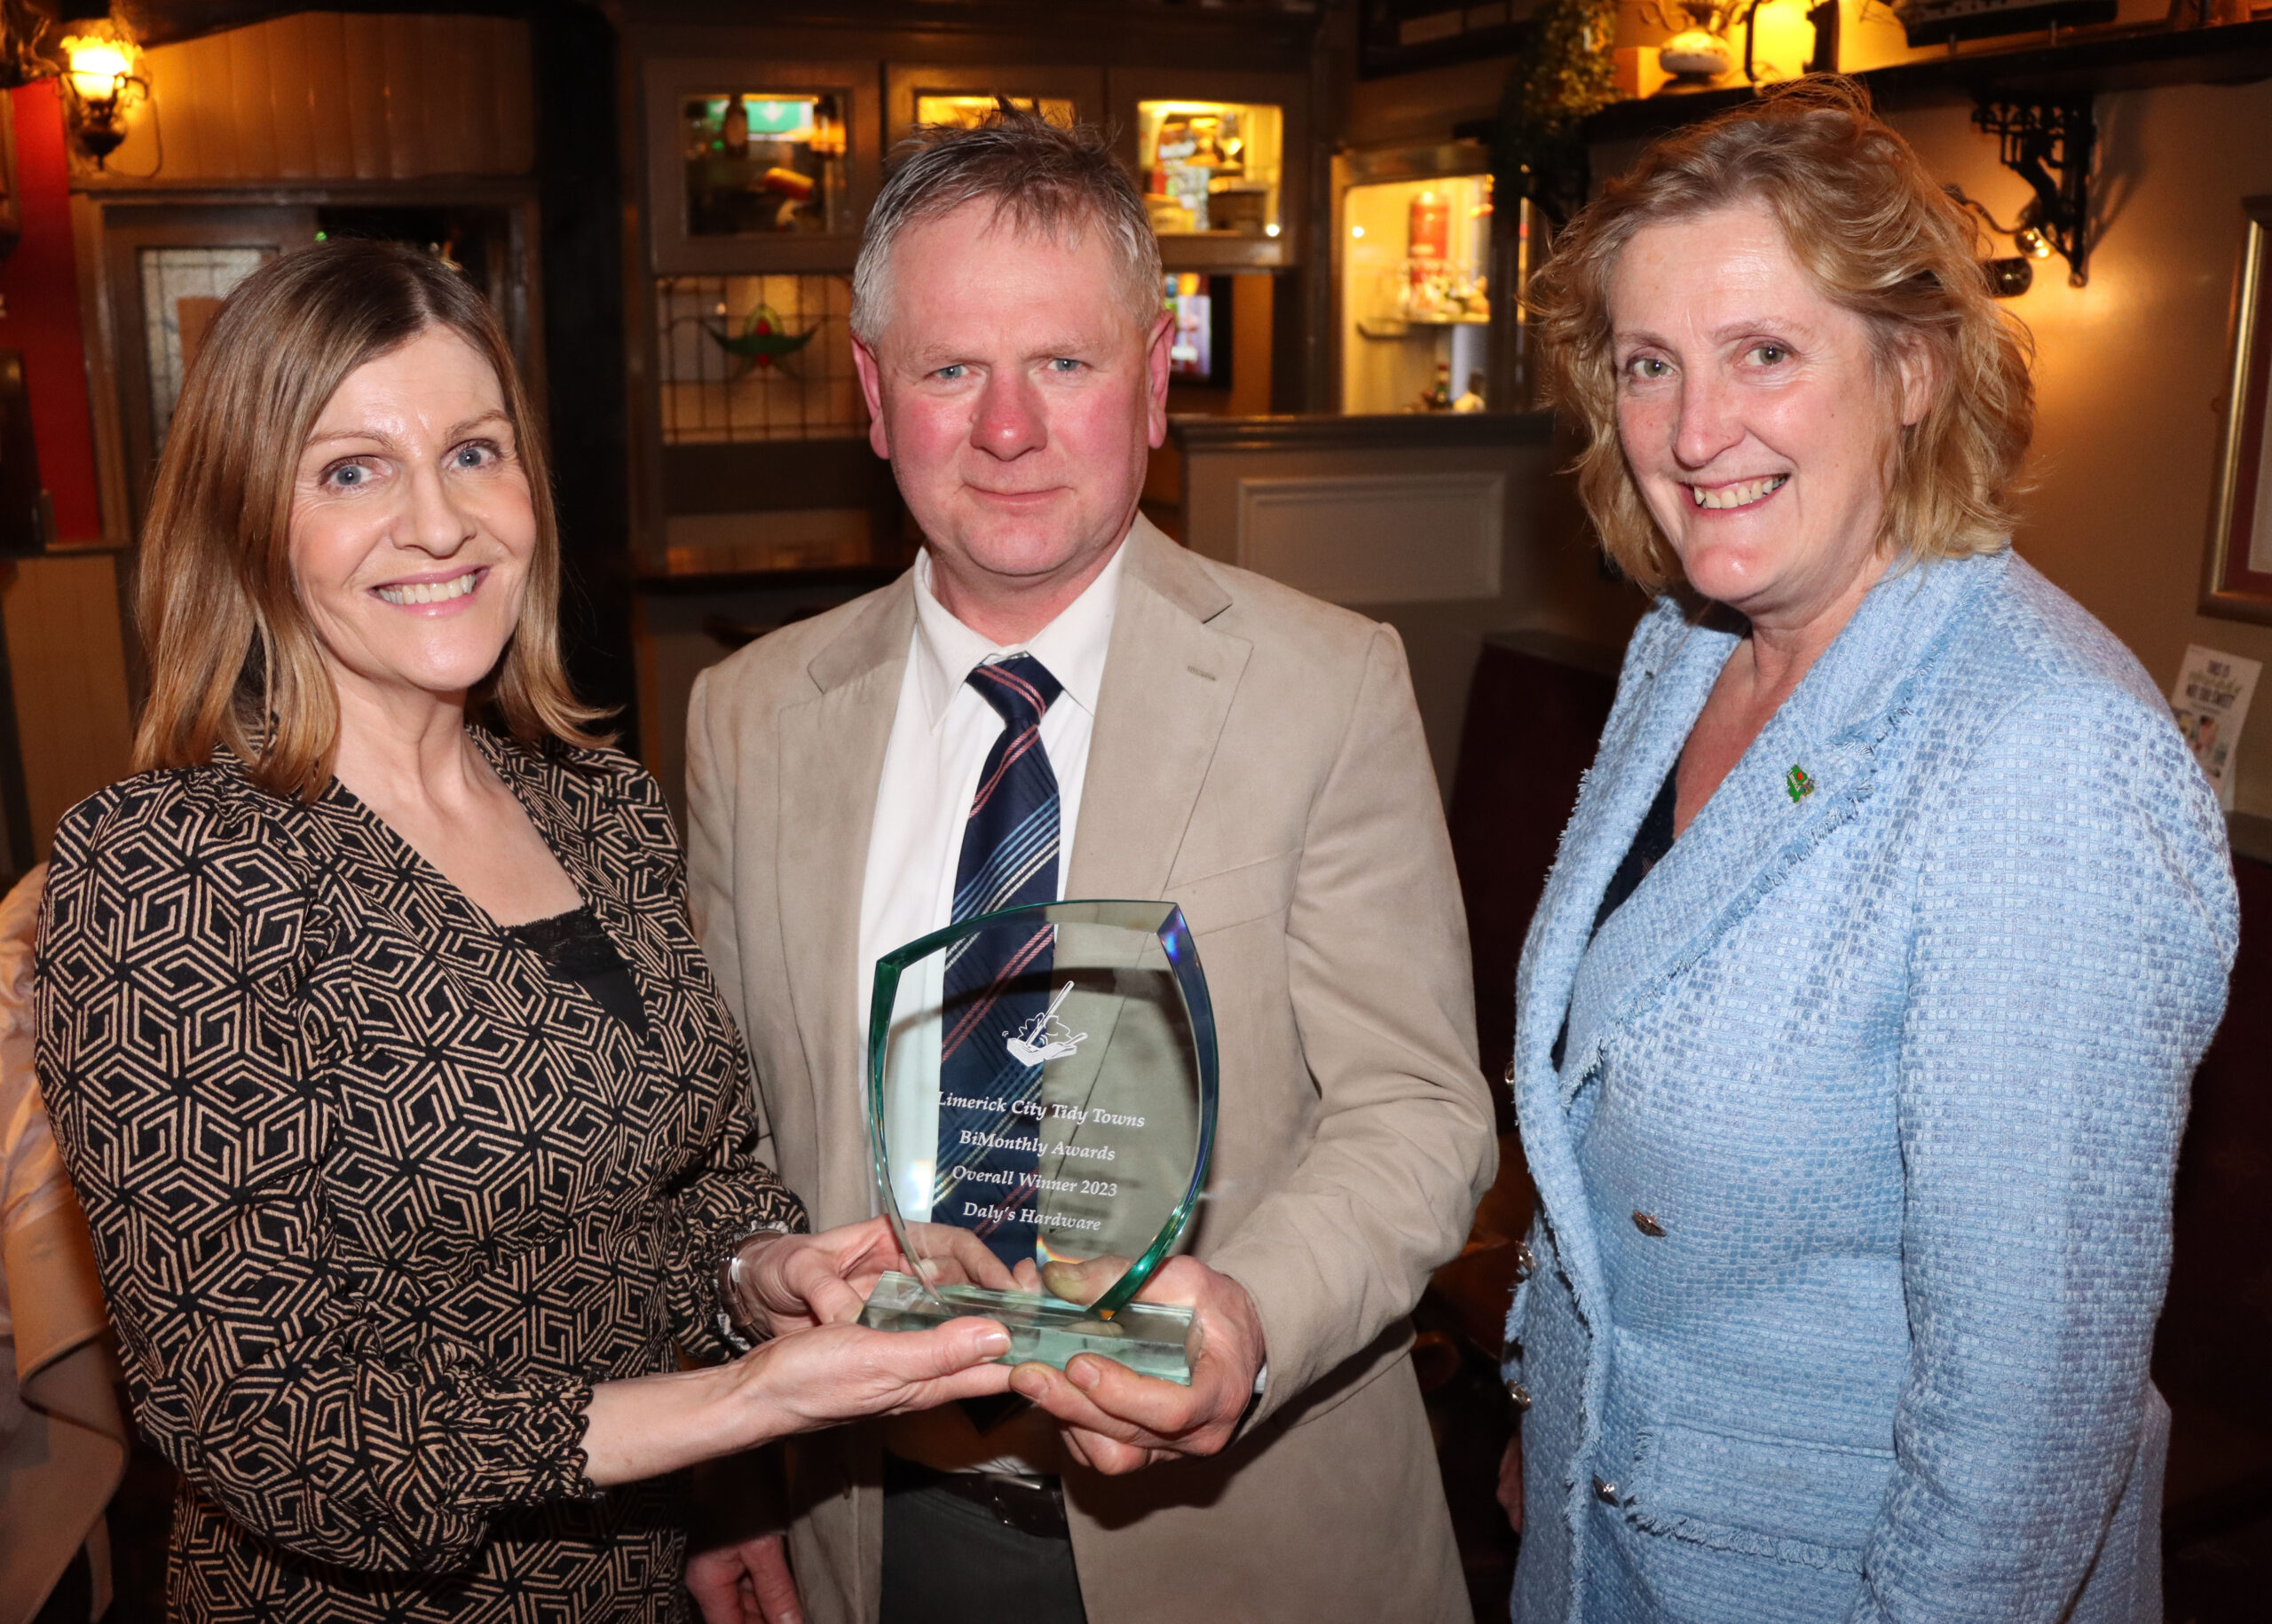 2023 Limerick City Tidy Towns winner is Daly’s Hardware and pictured receiving the award from Helen O’Donnell and Maura O’Neill is Roger Daly from Daly’s Hardware. Picture: Adrian Butler, Limerick Leader